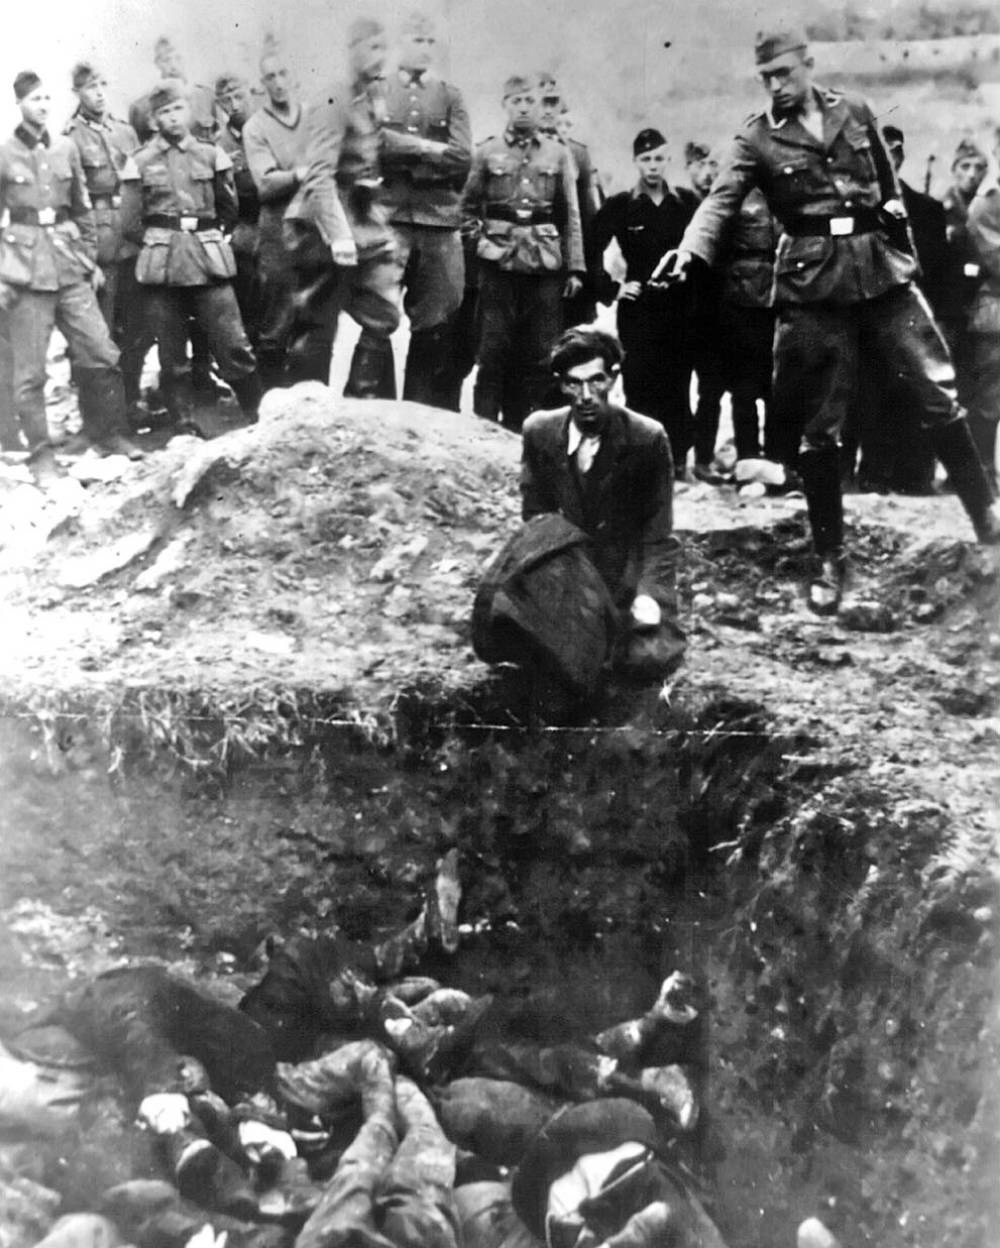 “The last Jew of Vinnytsia.” In 1941 all 28,000 Jews of the city of Vinnytsia and the surrounding area were exterminated by the Germans and with the help of a Ukrainian militia trained by the SS. (Details here)